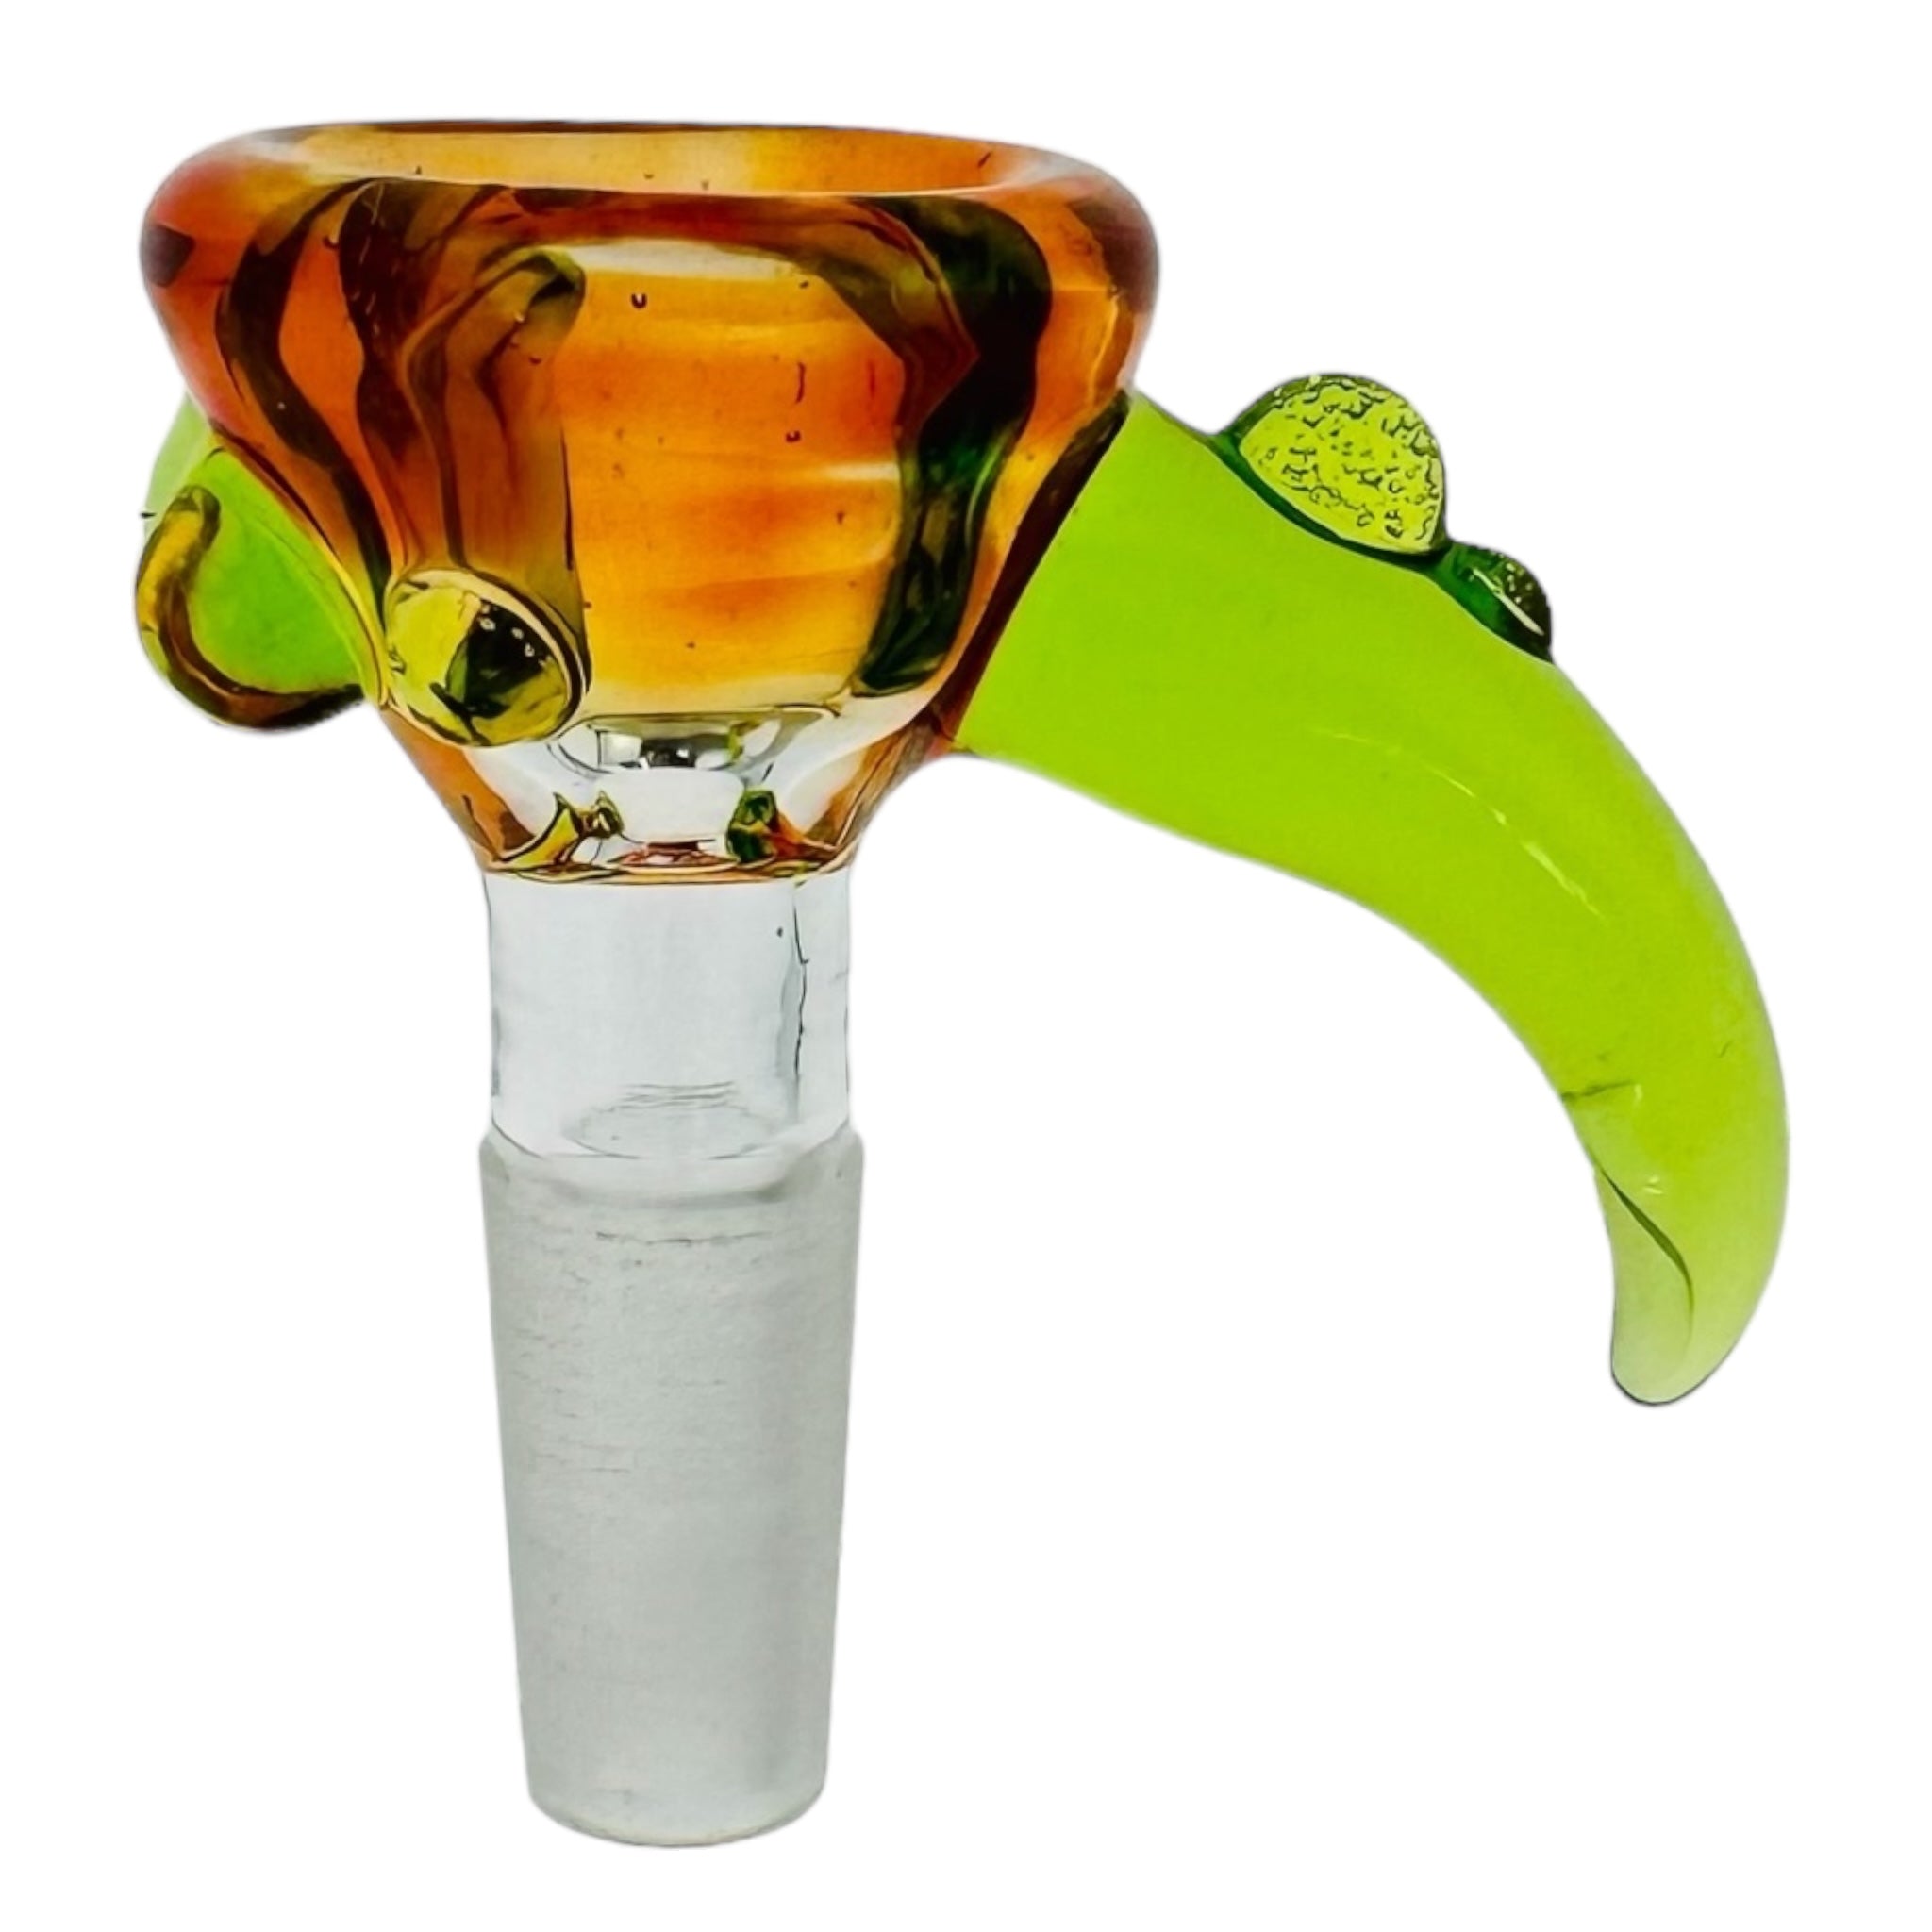 10mm bong bowl slide for weed made by arko glass best heady 10mm bong bowl for sale 